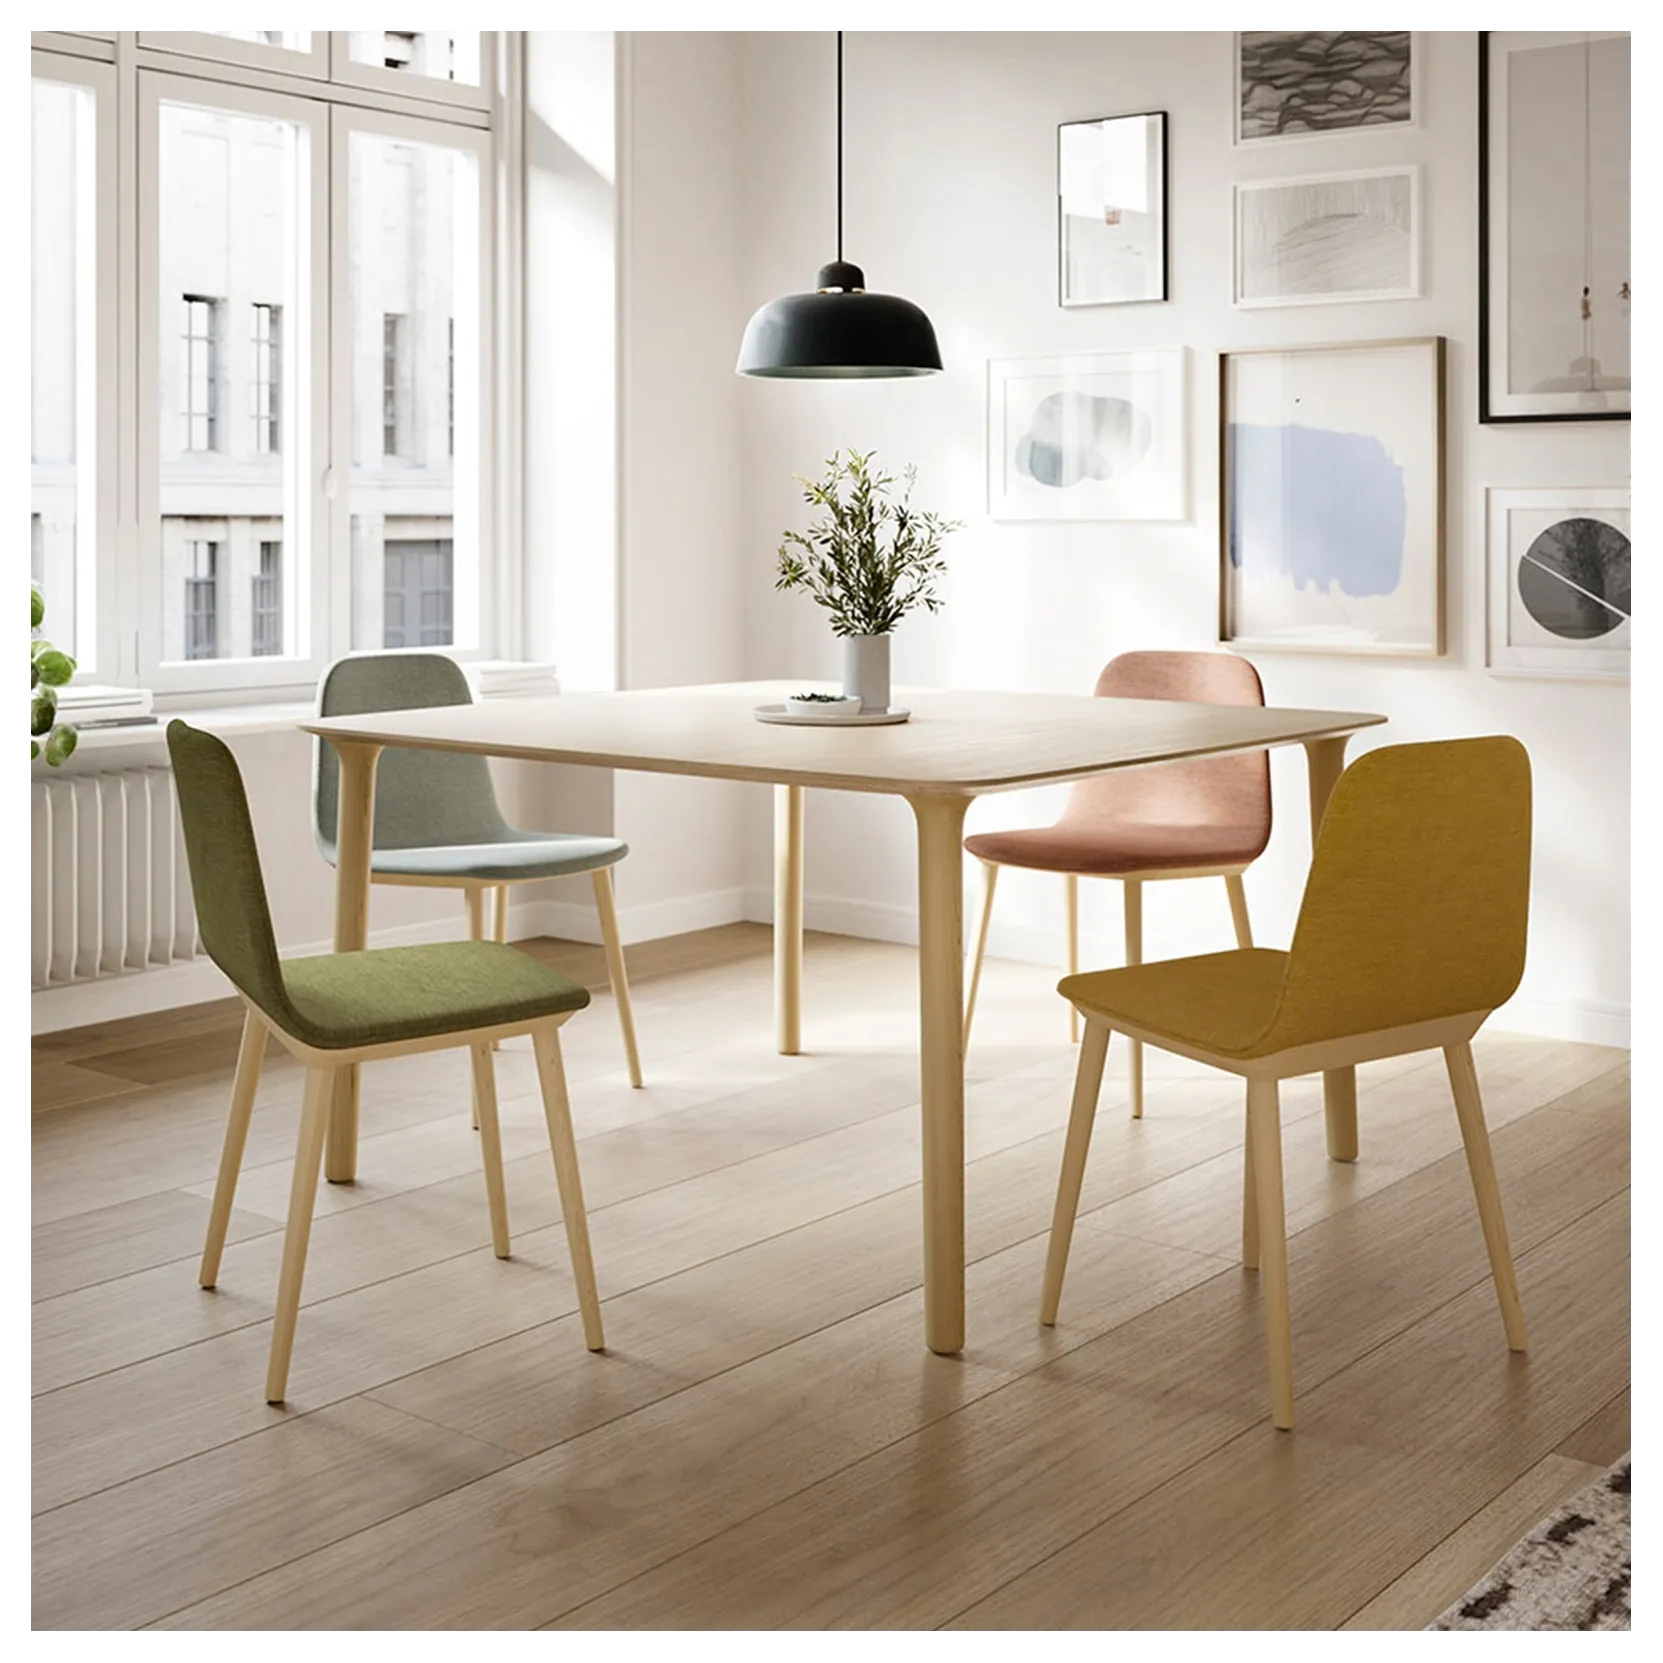 Table Treku Roll Barthome, Rolling Dining Table Chairs